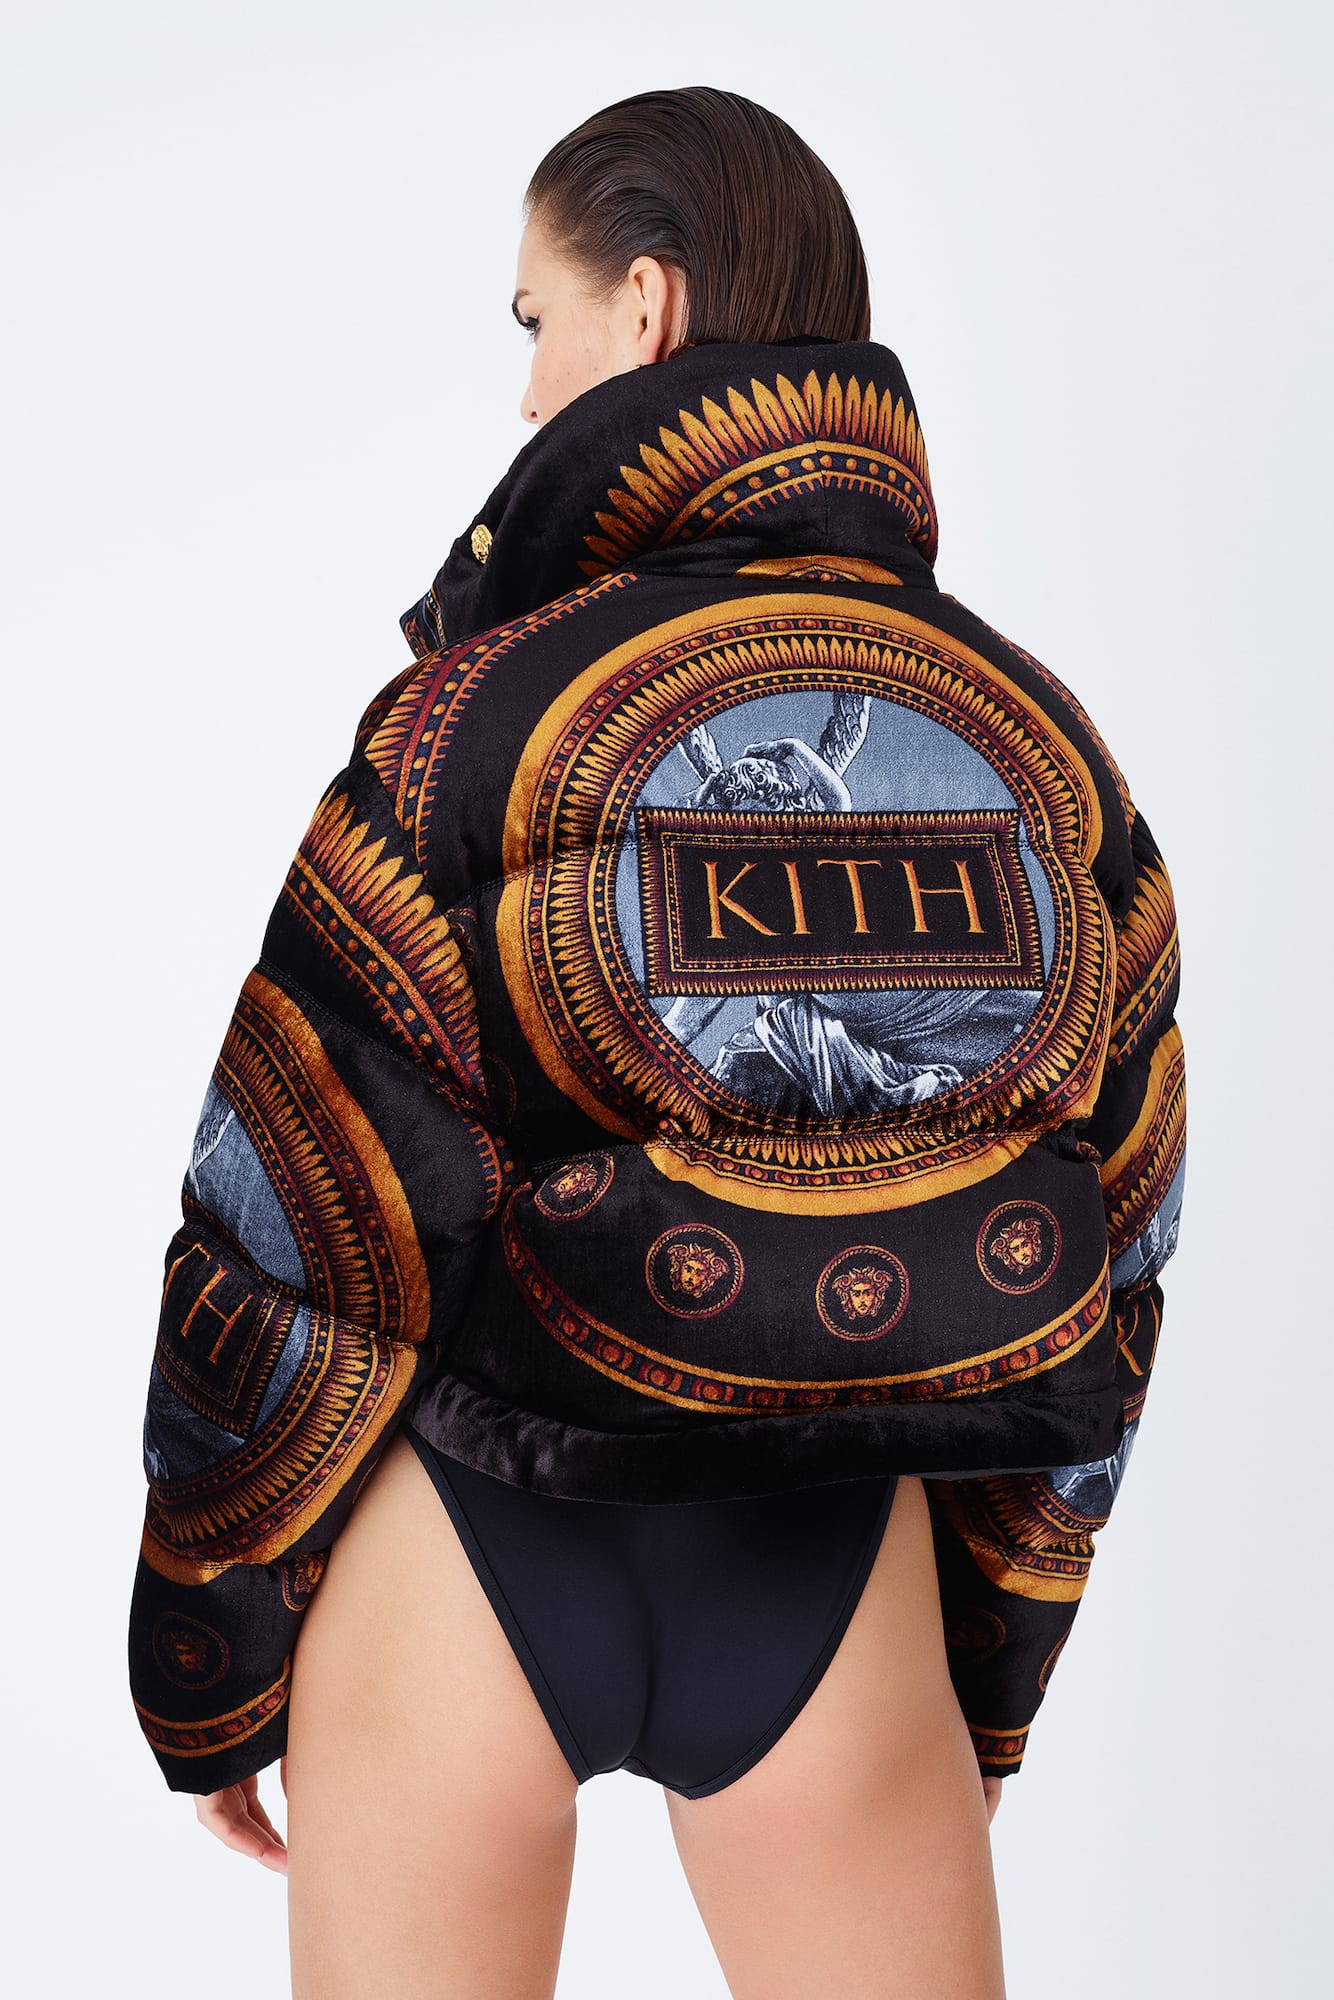 kith x versace collection